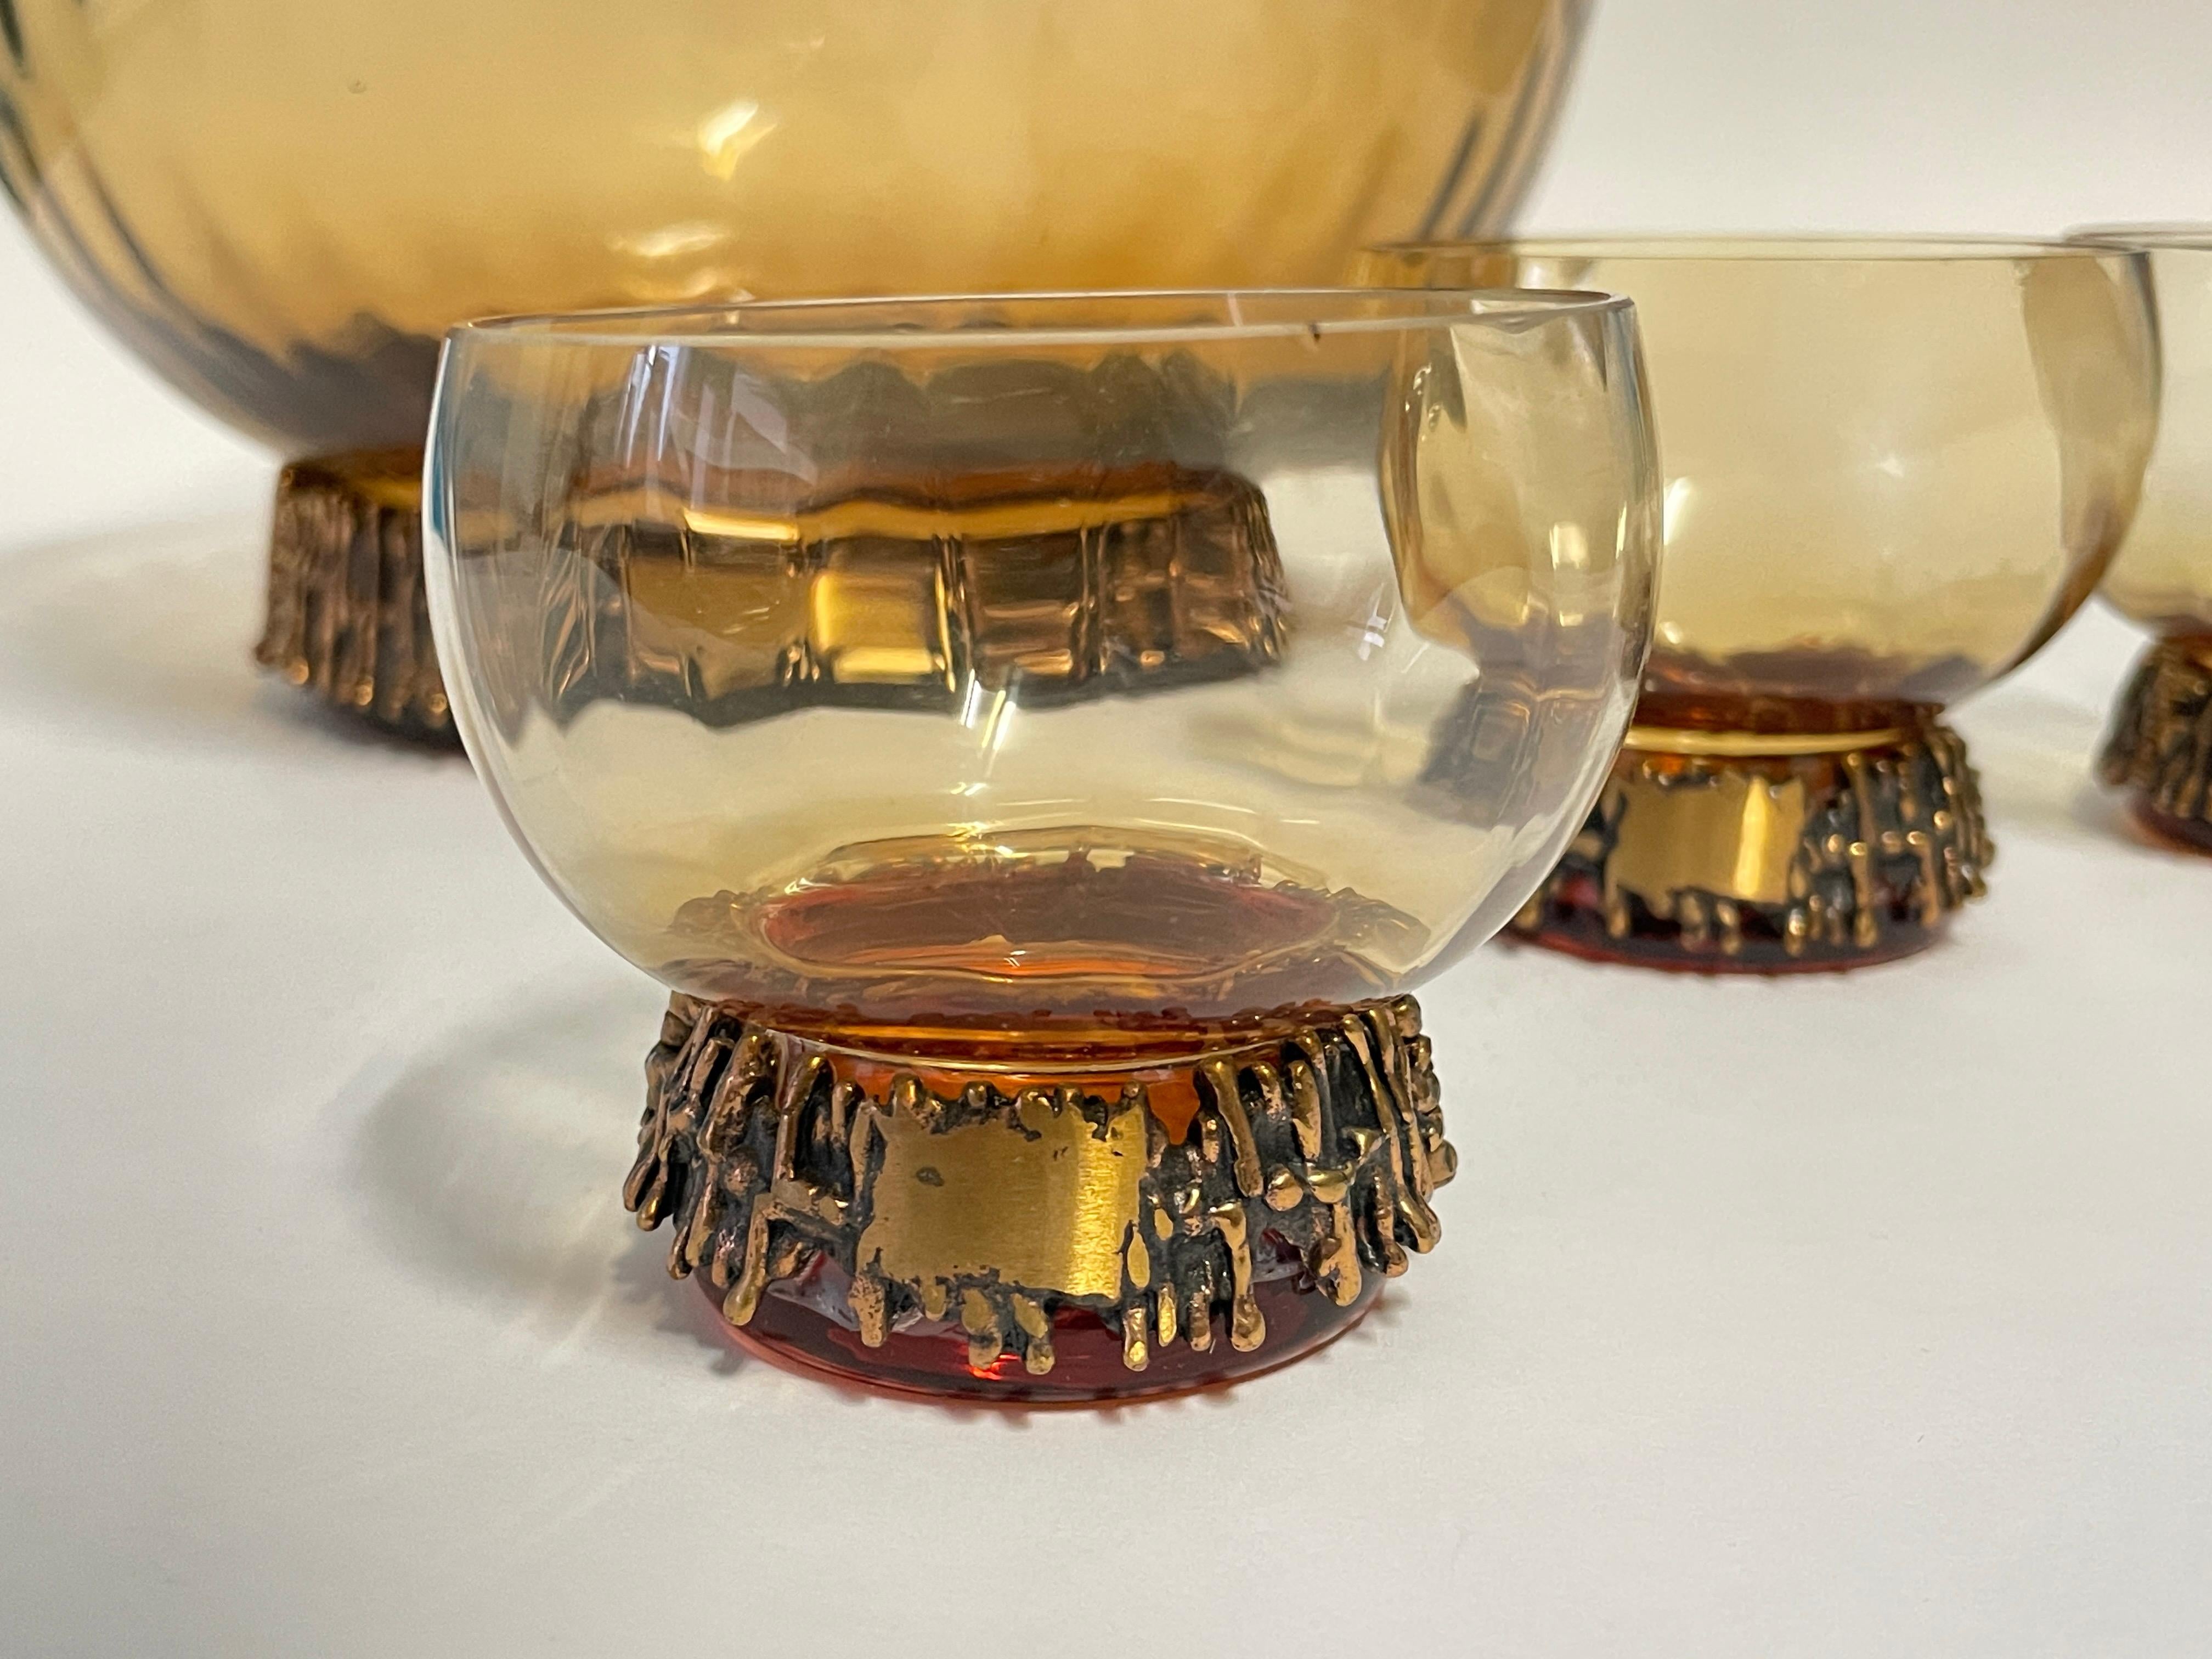 Finnish Bronze/Glass Bowl and 4pcs Punch Glasses from 1960s by Pentti Sarpaneva For Sale